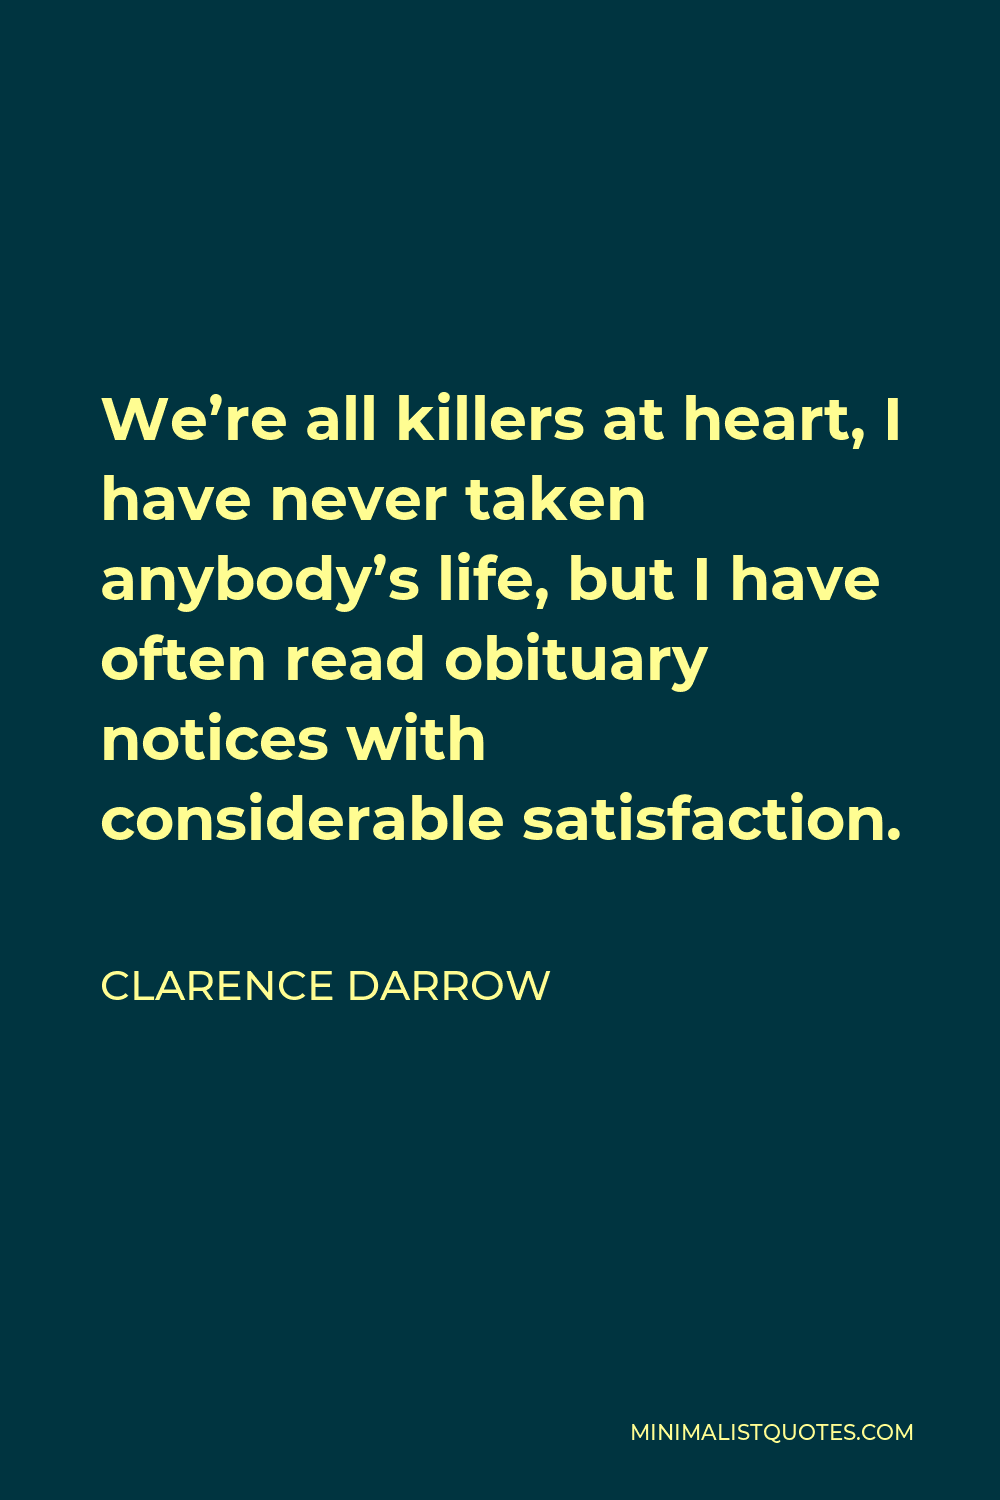 Clarence Darrow Quote - We’re all killers at heart, I have never taken anybody’s life, but I have often read obituary notices with considerable satisfaction.